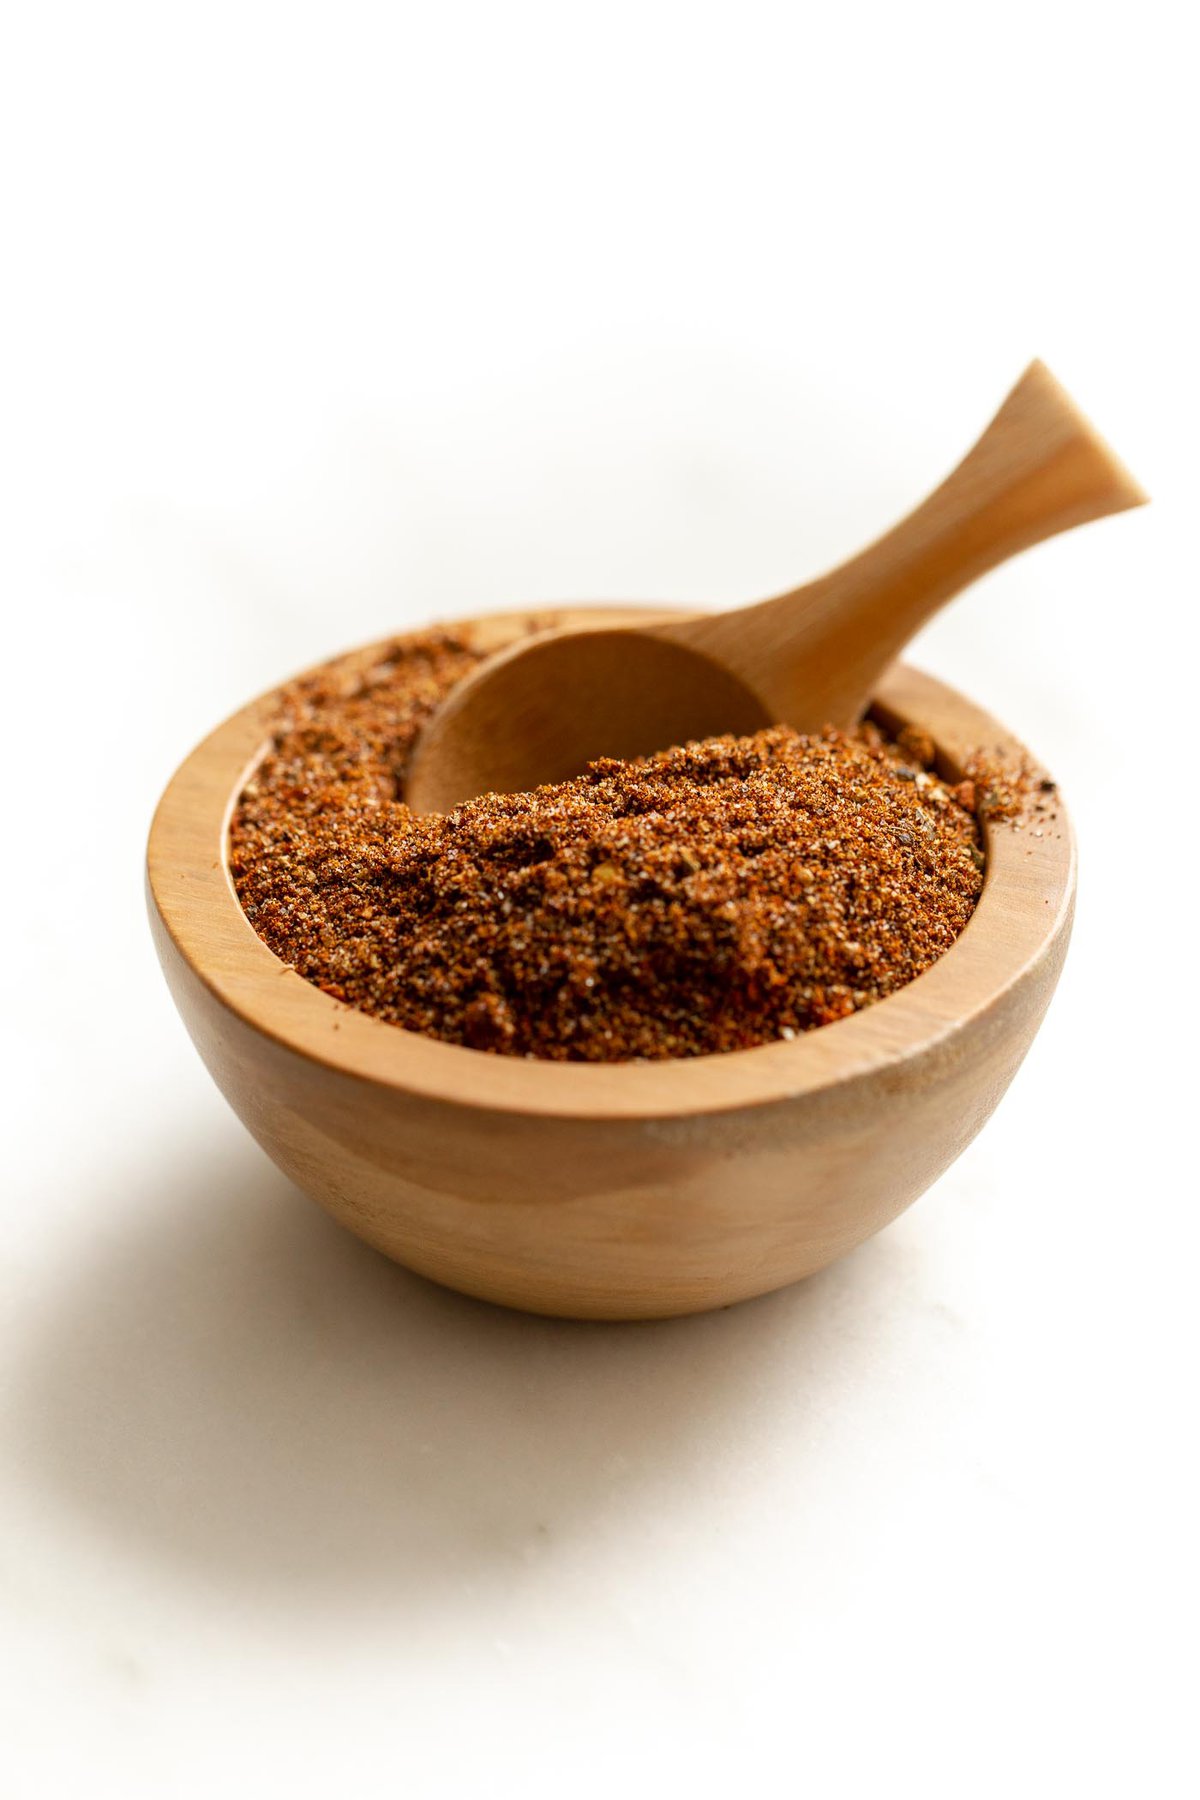 A small wooden bowl full of homemade taco seasoning, with a wooden teaspoon inside.